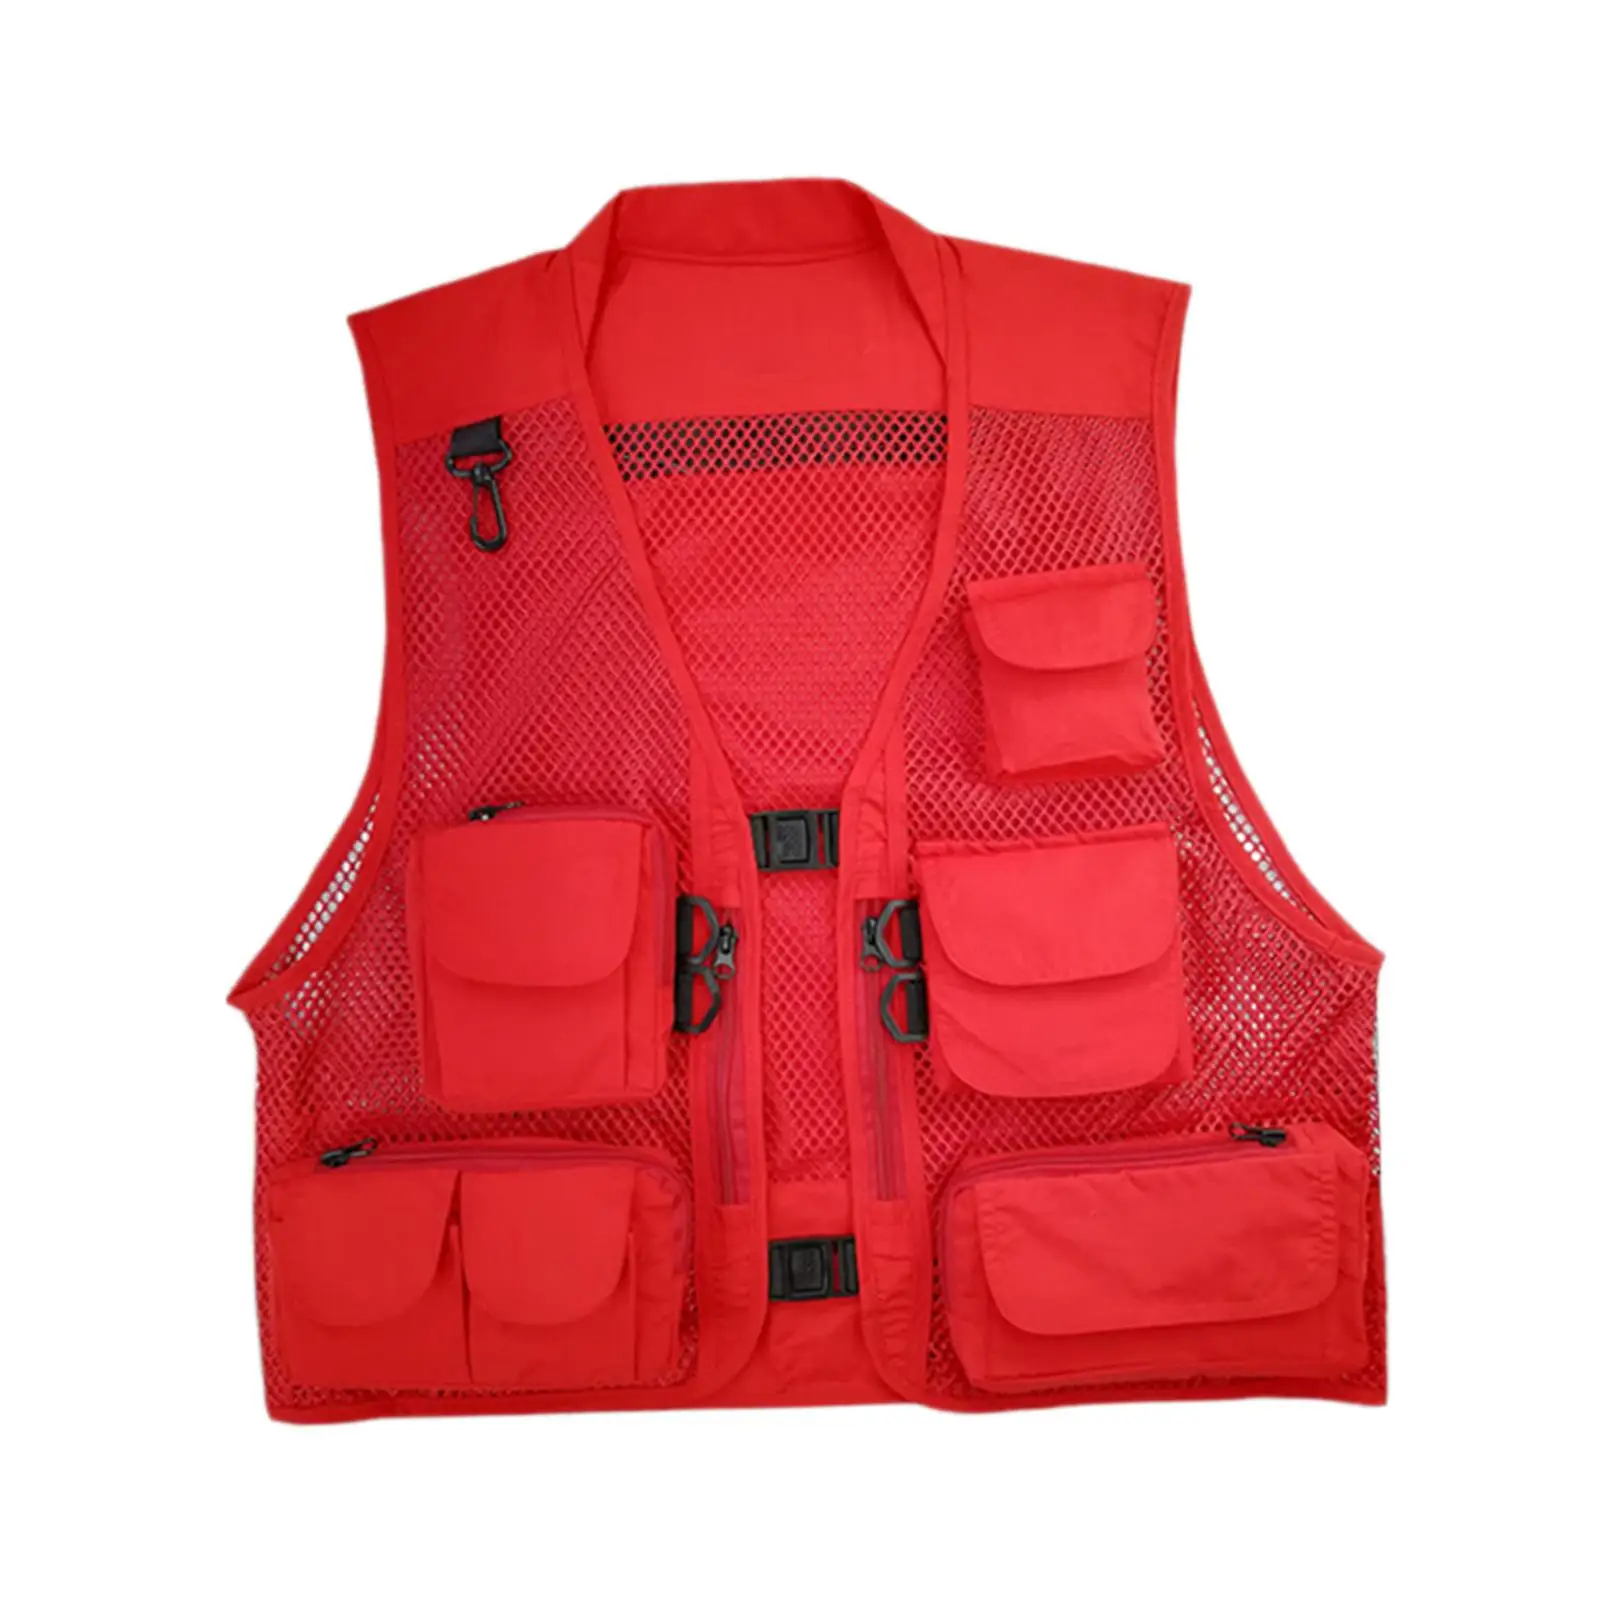 Mesh Camping Fishing Vest Multi Zipper Pockets for Sightseeing,Traveling